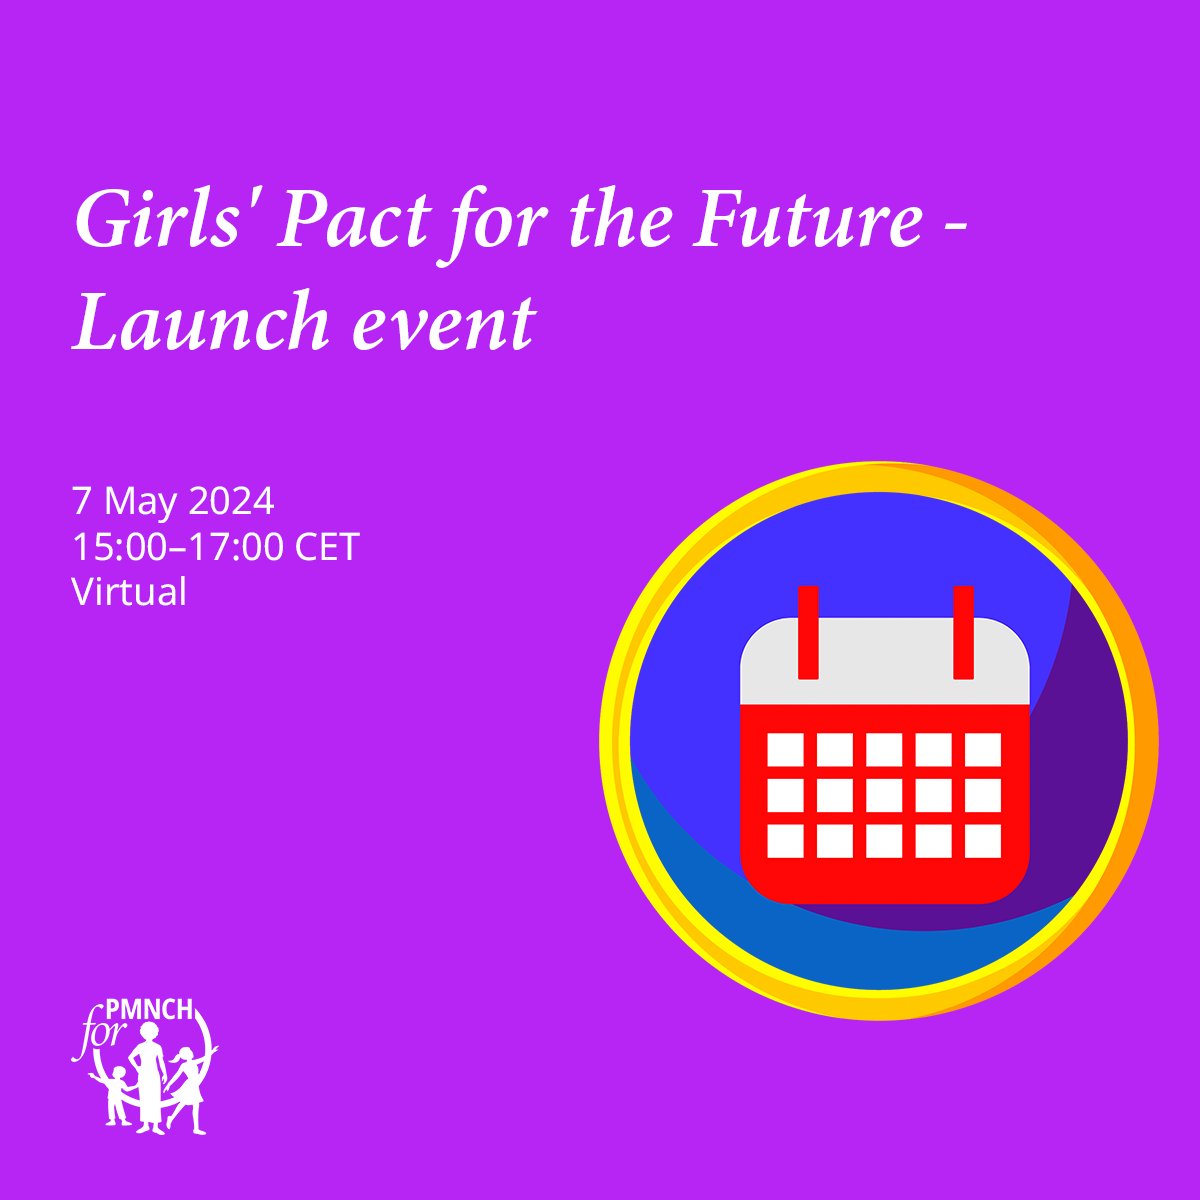 🚨 Hapenning TODAY! 🚀 Join @PlanGlobal for the launch of the Girls' Pact for the Future, a vision of gender equality crafted by youth worldwide! This event will showcase the voices and actions of young leaders. 🕒 15:00 – 17:00 CET Don't miss out! 👇 pmnch.who.int/news-and-event…